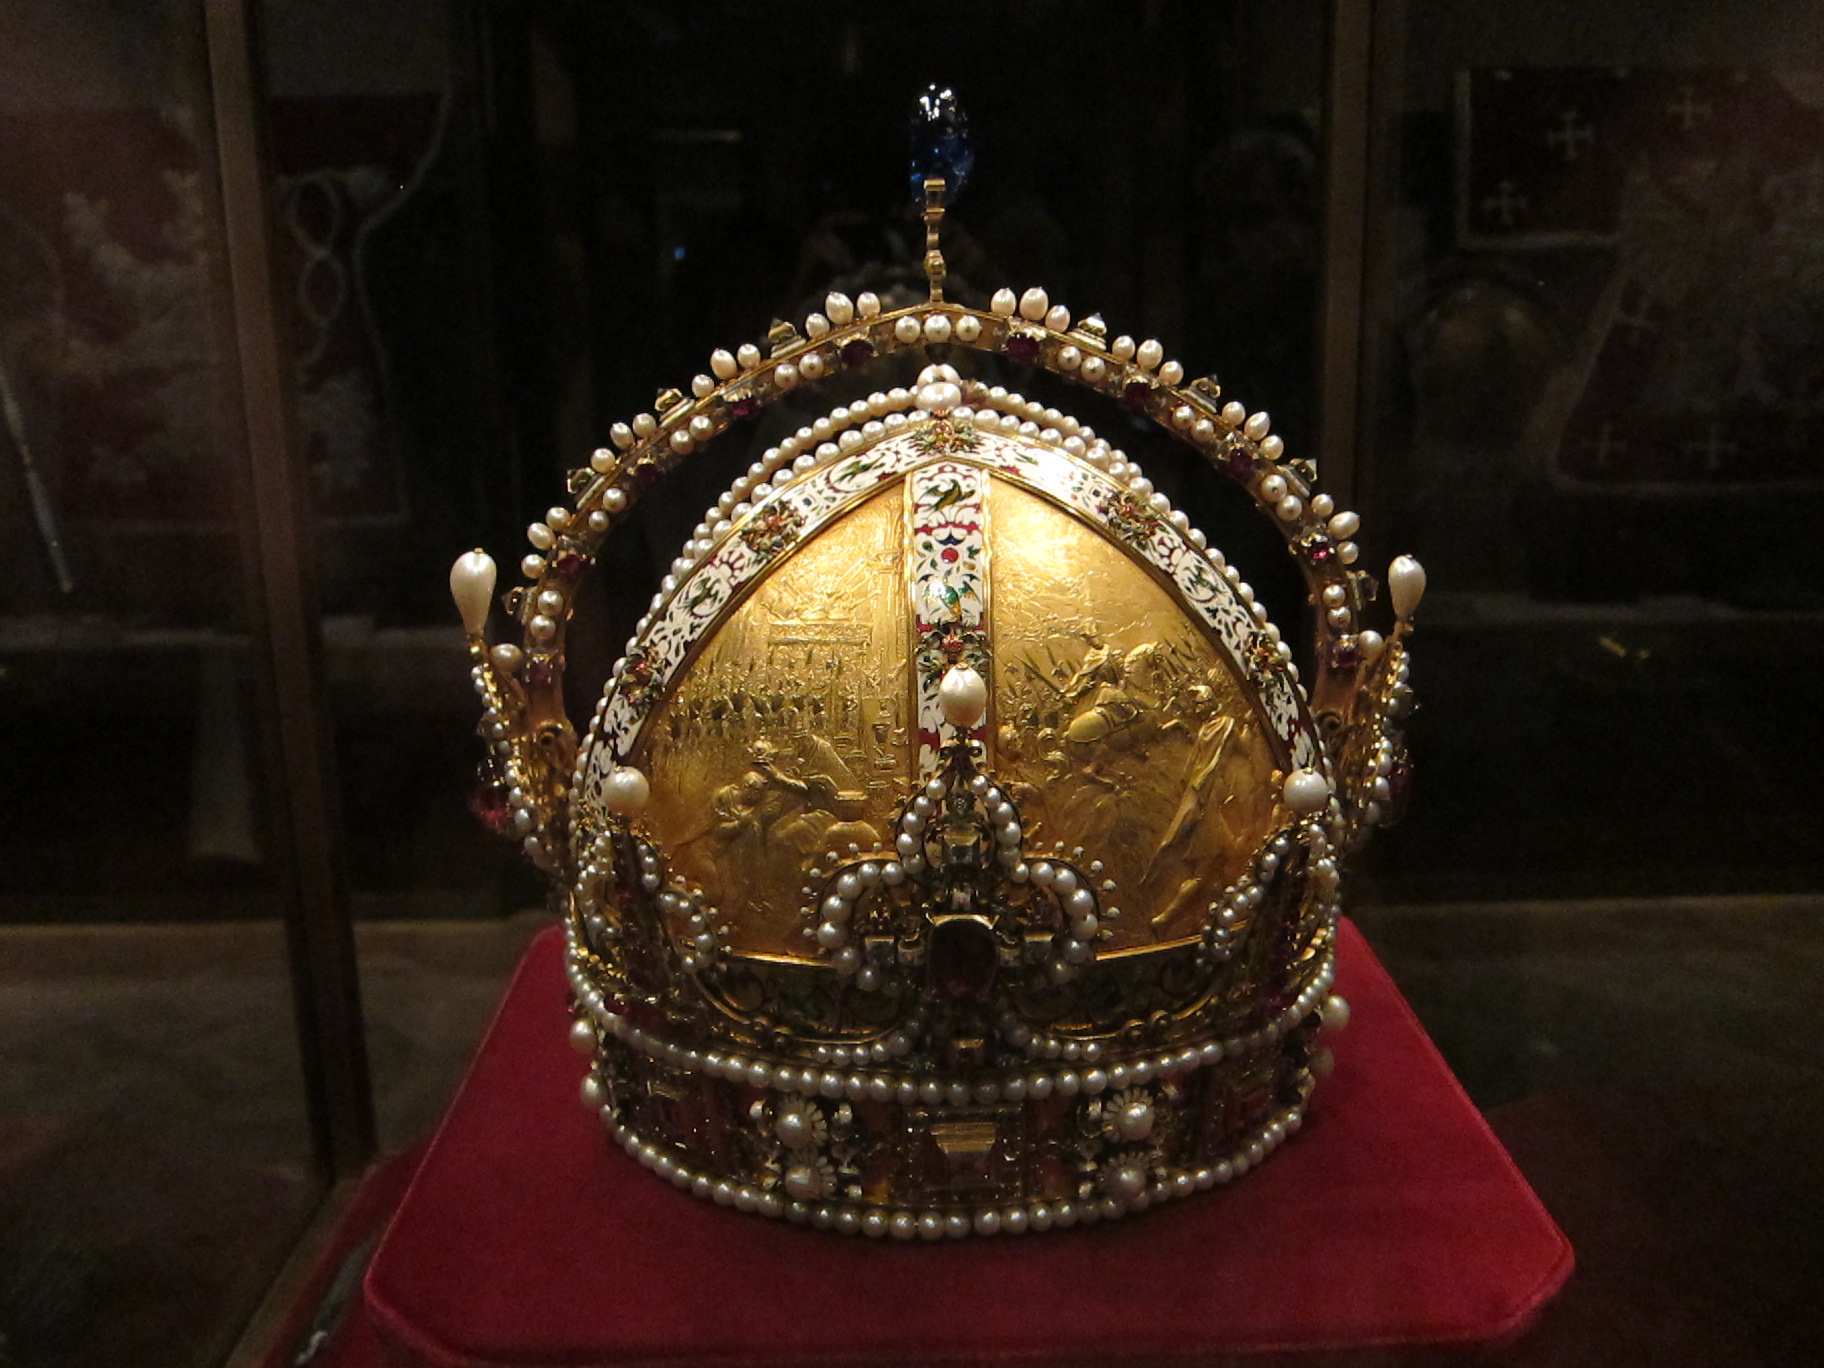 Imperial Crown of Austria | Flickr - Photo Sharing!